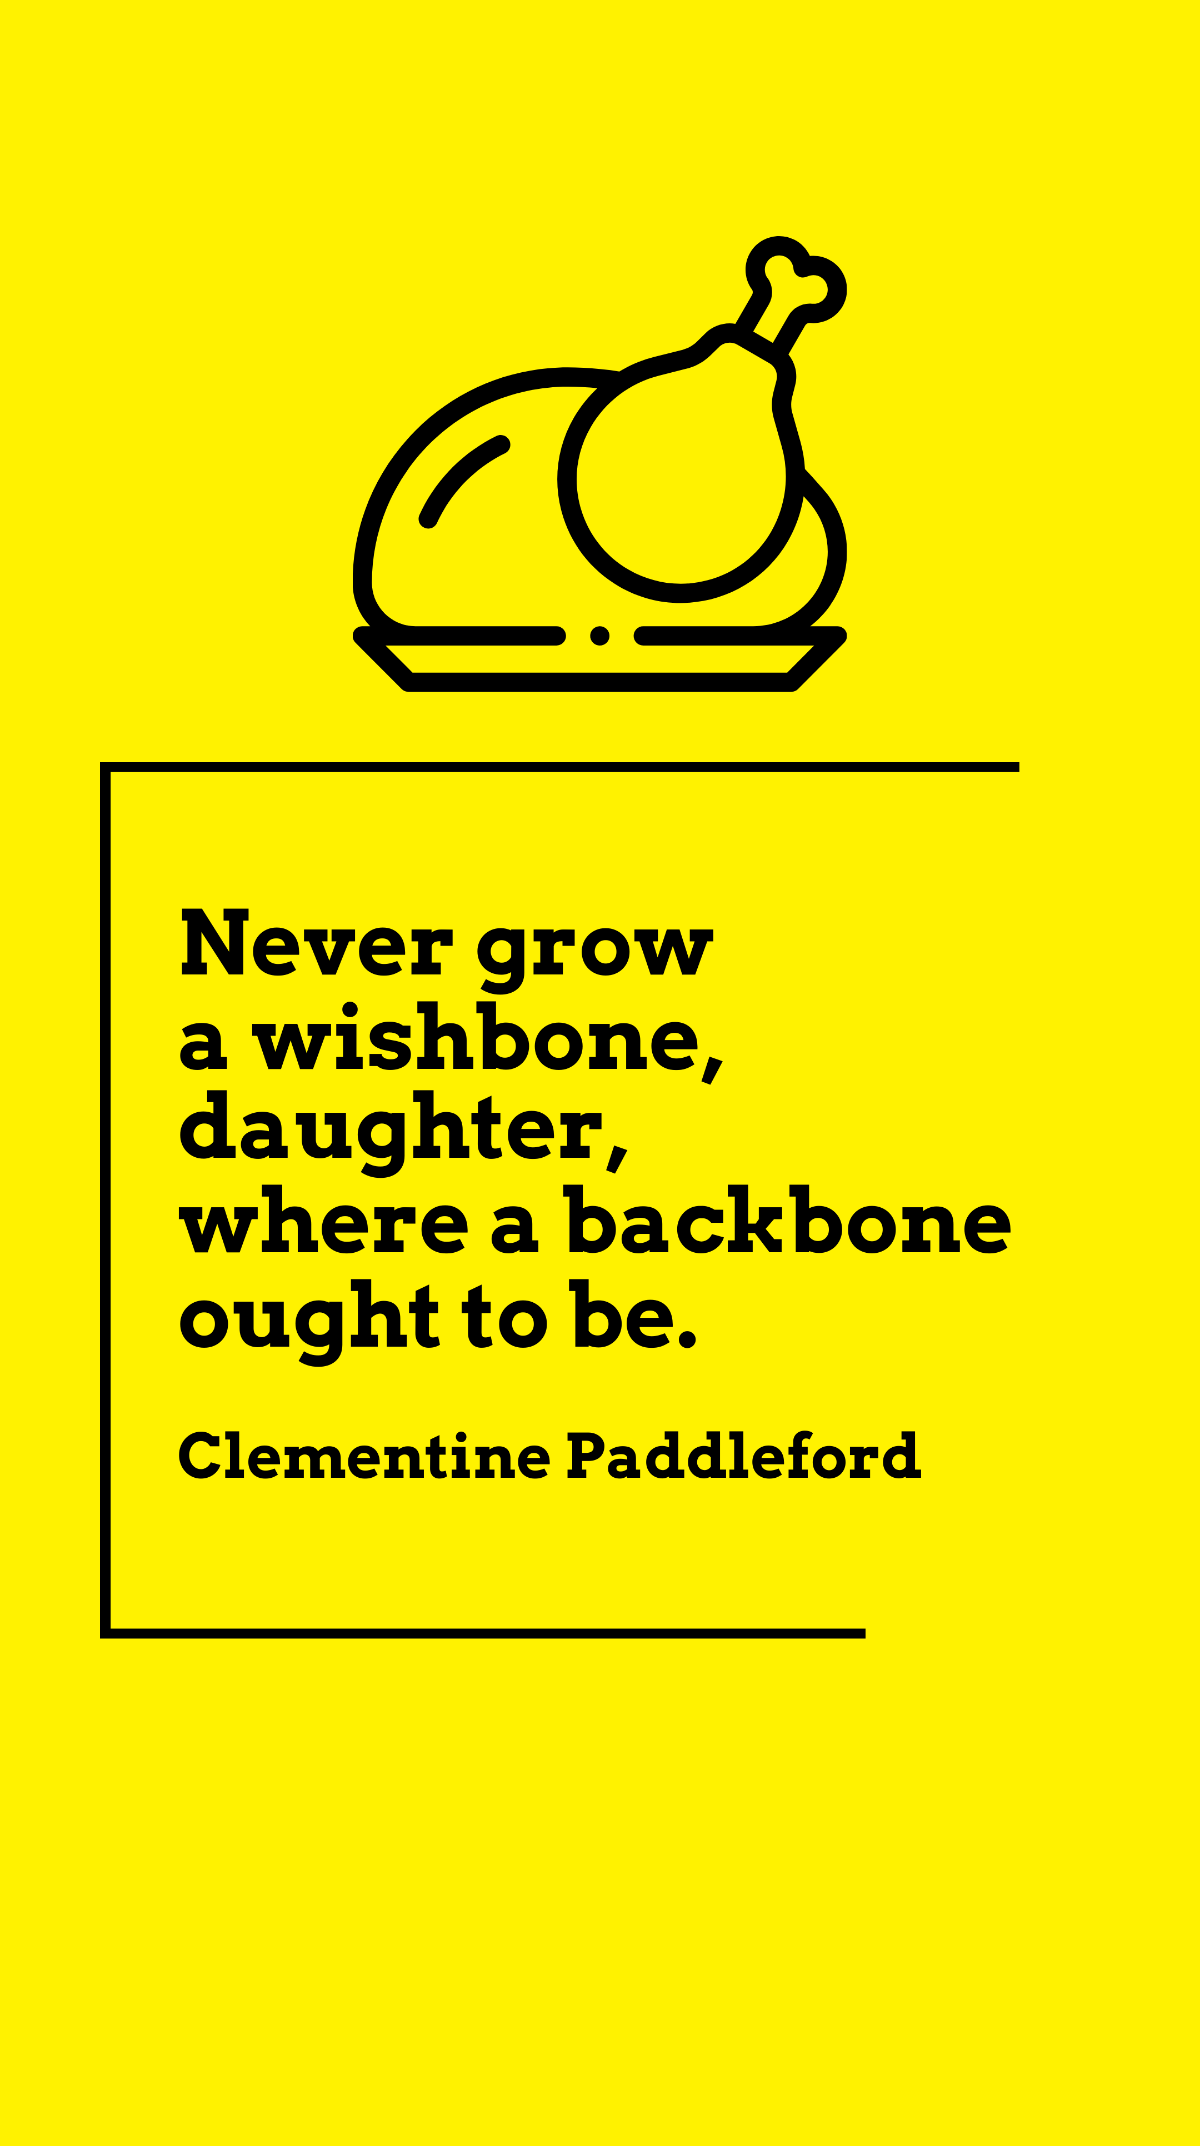 Free Clementine Paddleford - Never grow a wishbone, daughter, where a backbone ought to be. Template